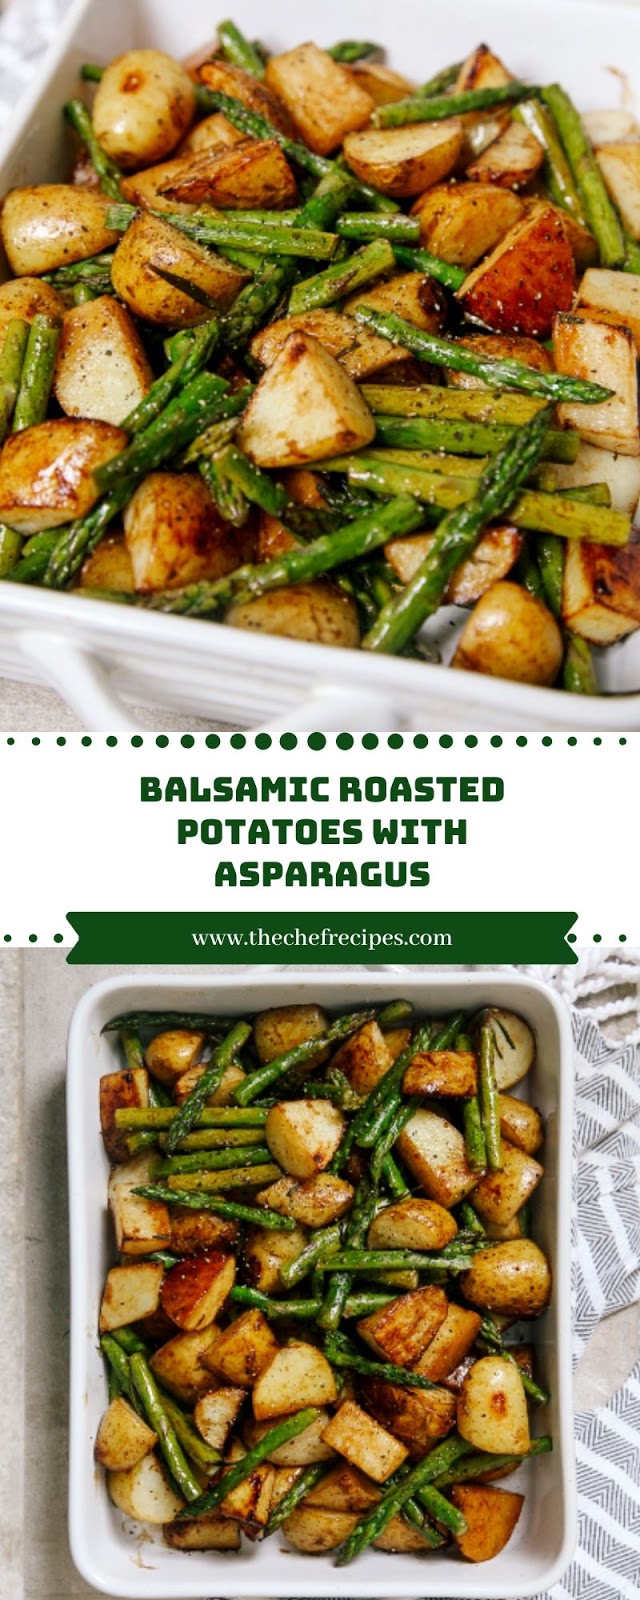 Balsamic Roasted Potatoes With Asparagus